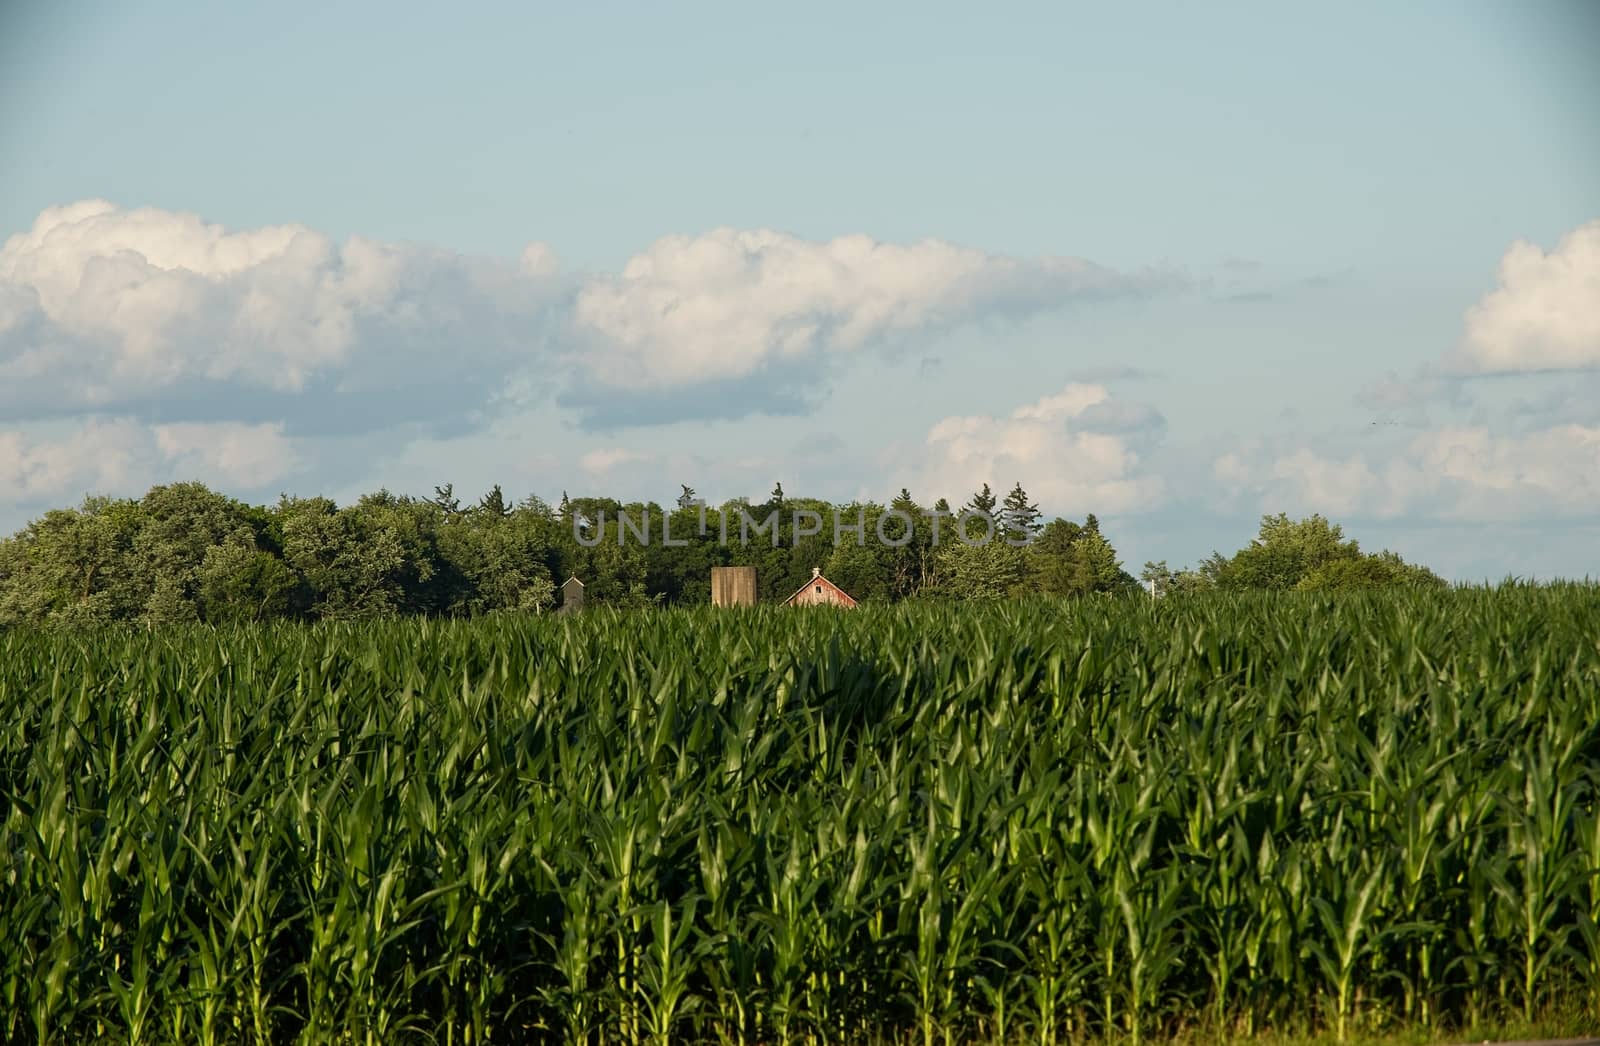 This is a vintagbarn and silo at the opposite end of a corn field on a summer's day. 